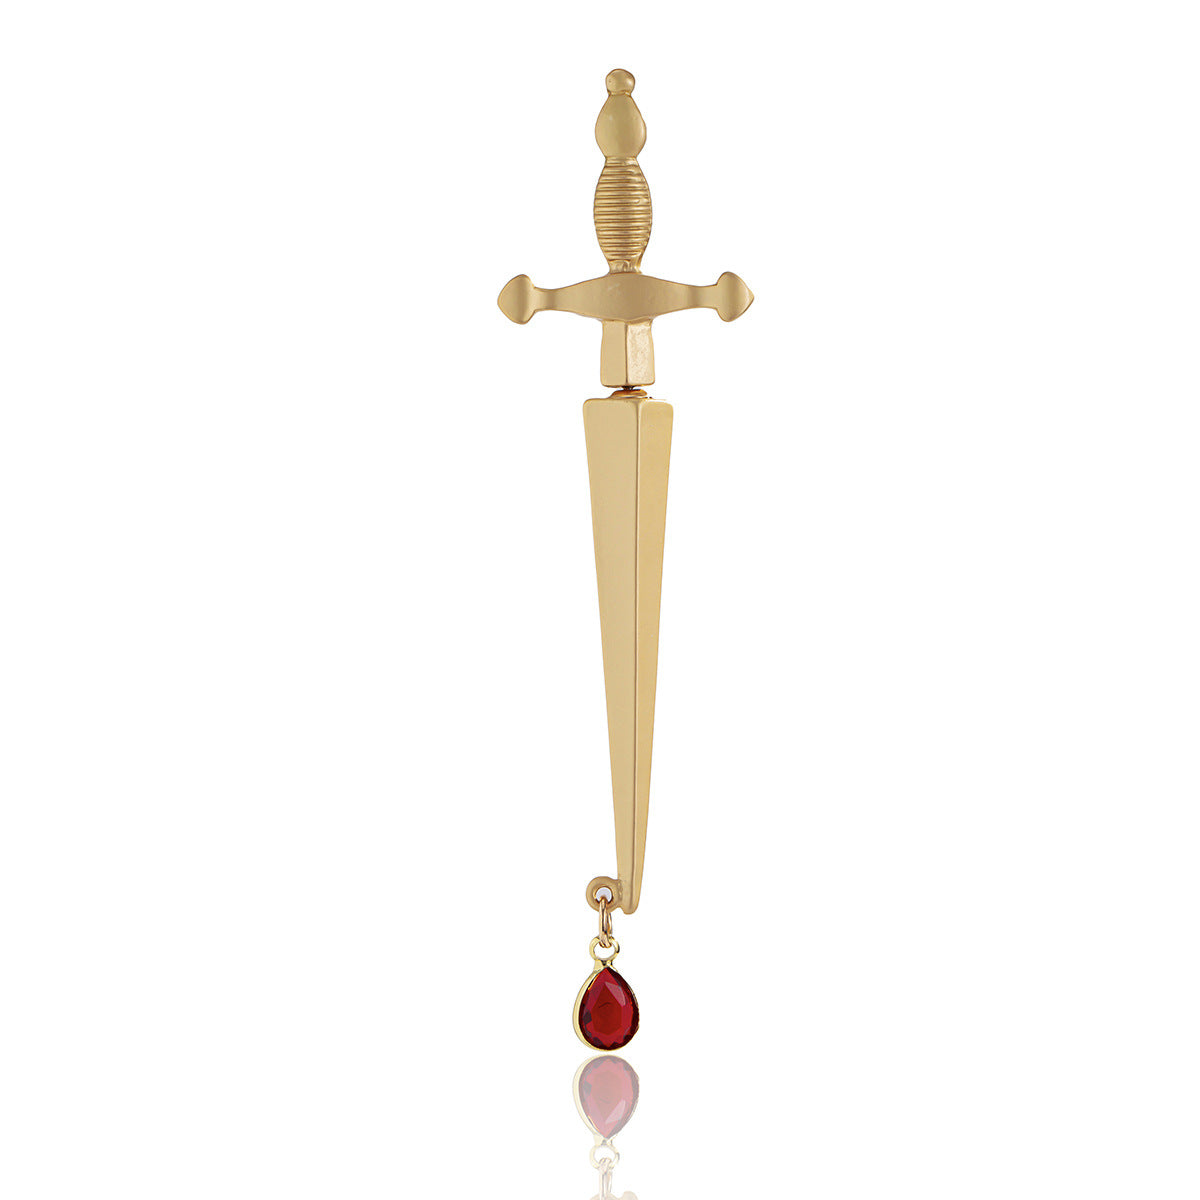 Gorgeous Long Sword Earring with a Dramatic Blood Drop Accent - 1pc